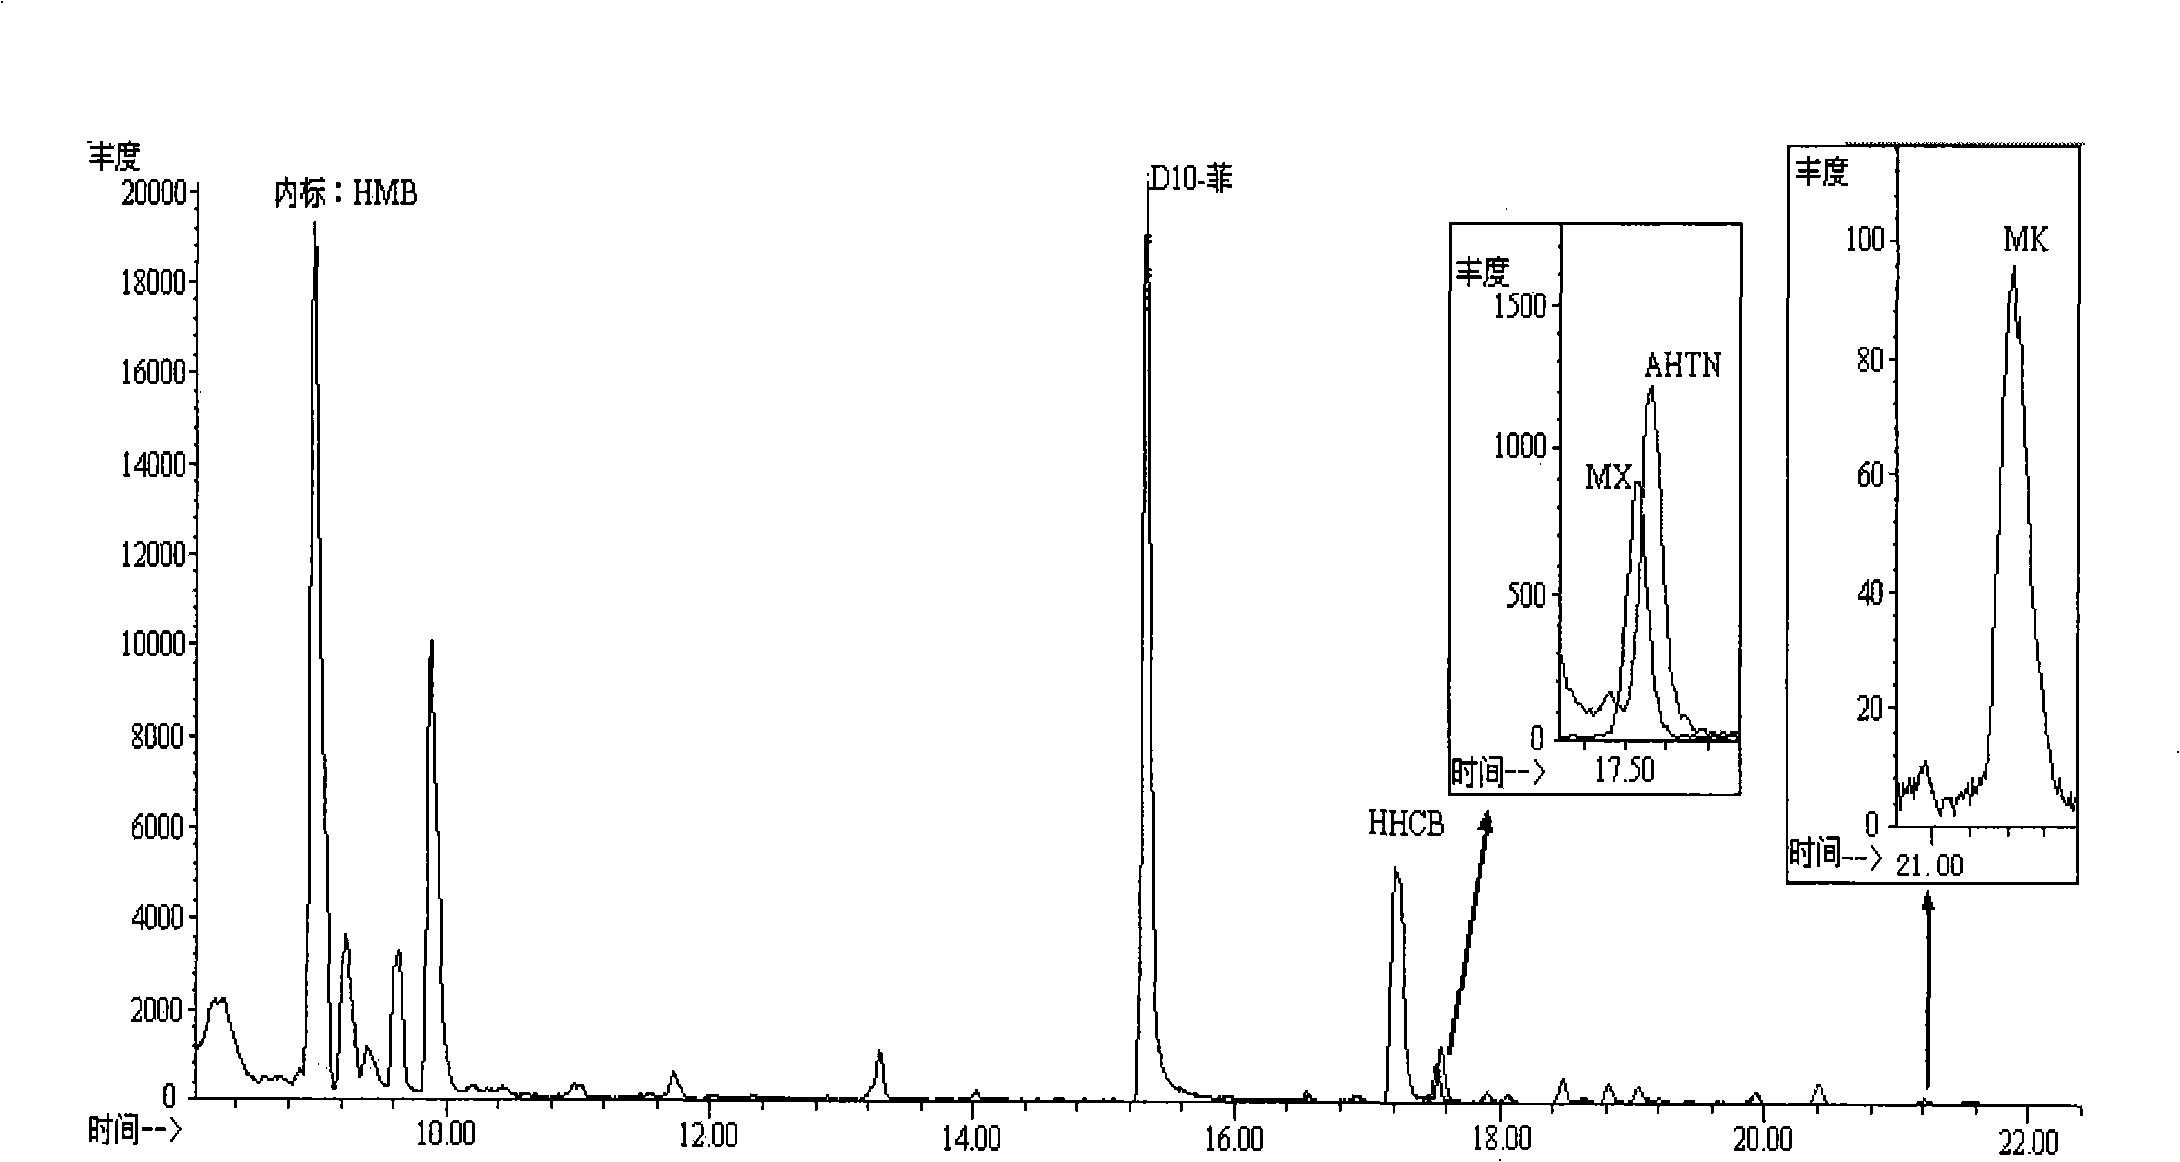 Method for determining synthetic musk concentration of breast milk